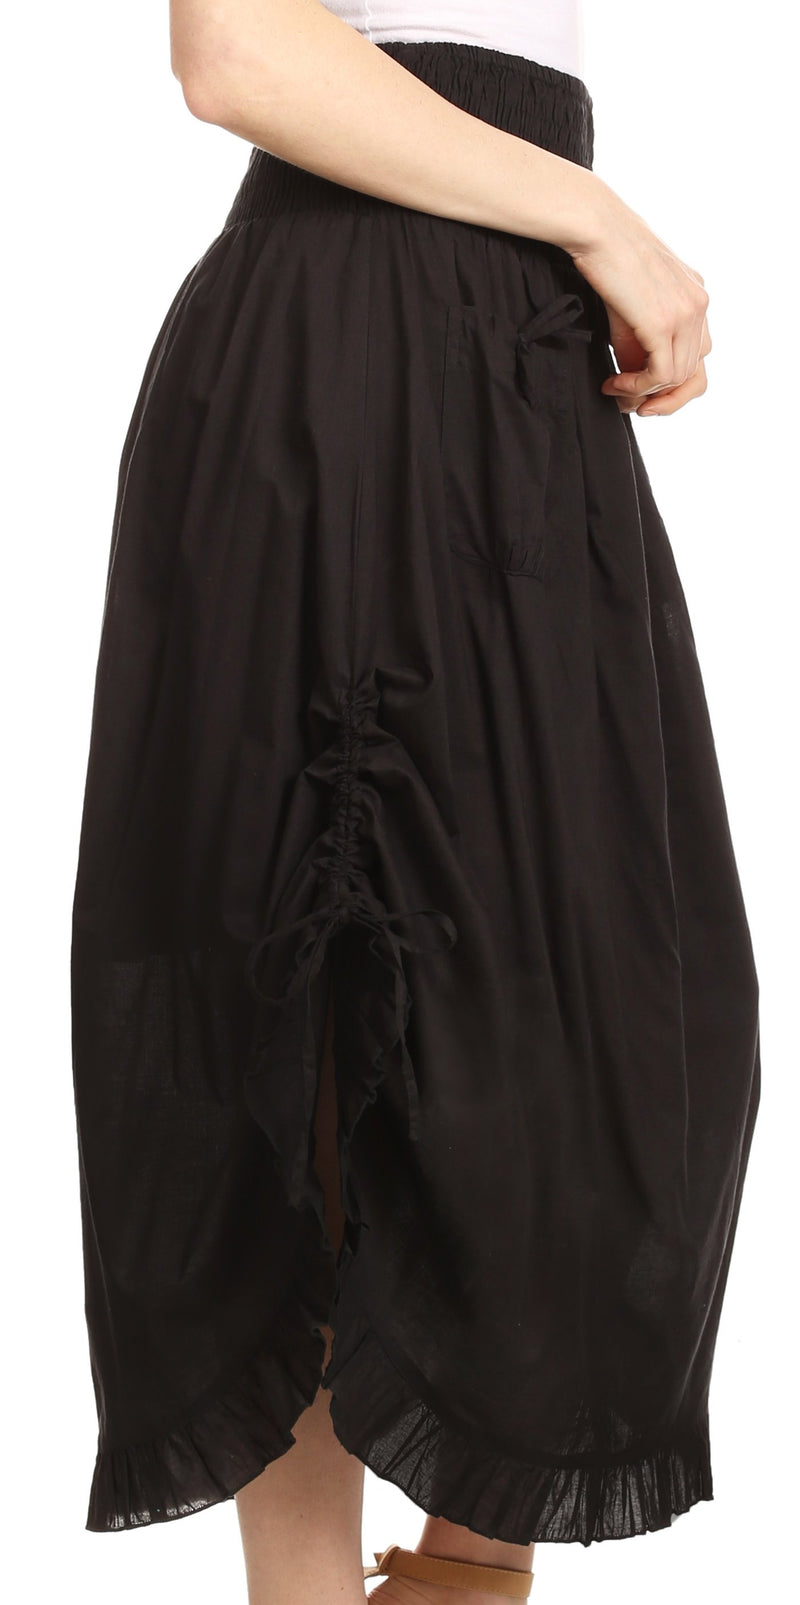 Sakkas Coco Long Cotton Ruffle Skirt with Pockets and Elastic Waistband